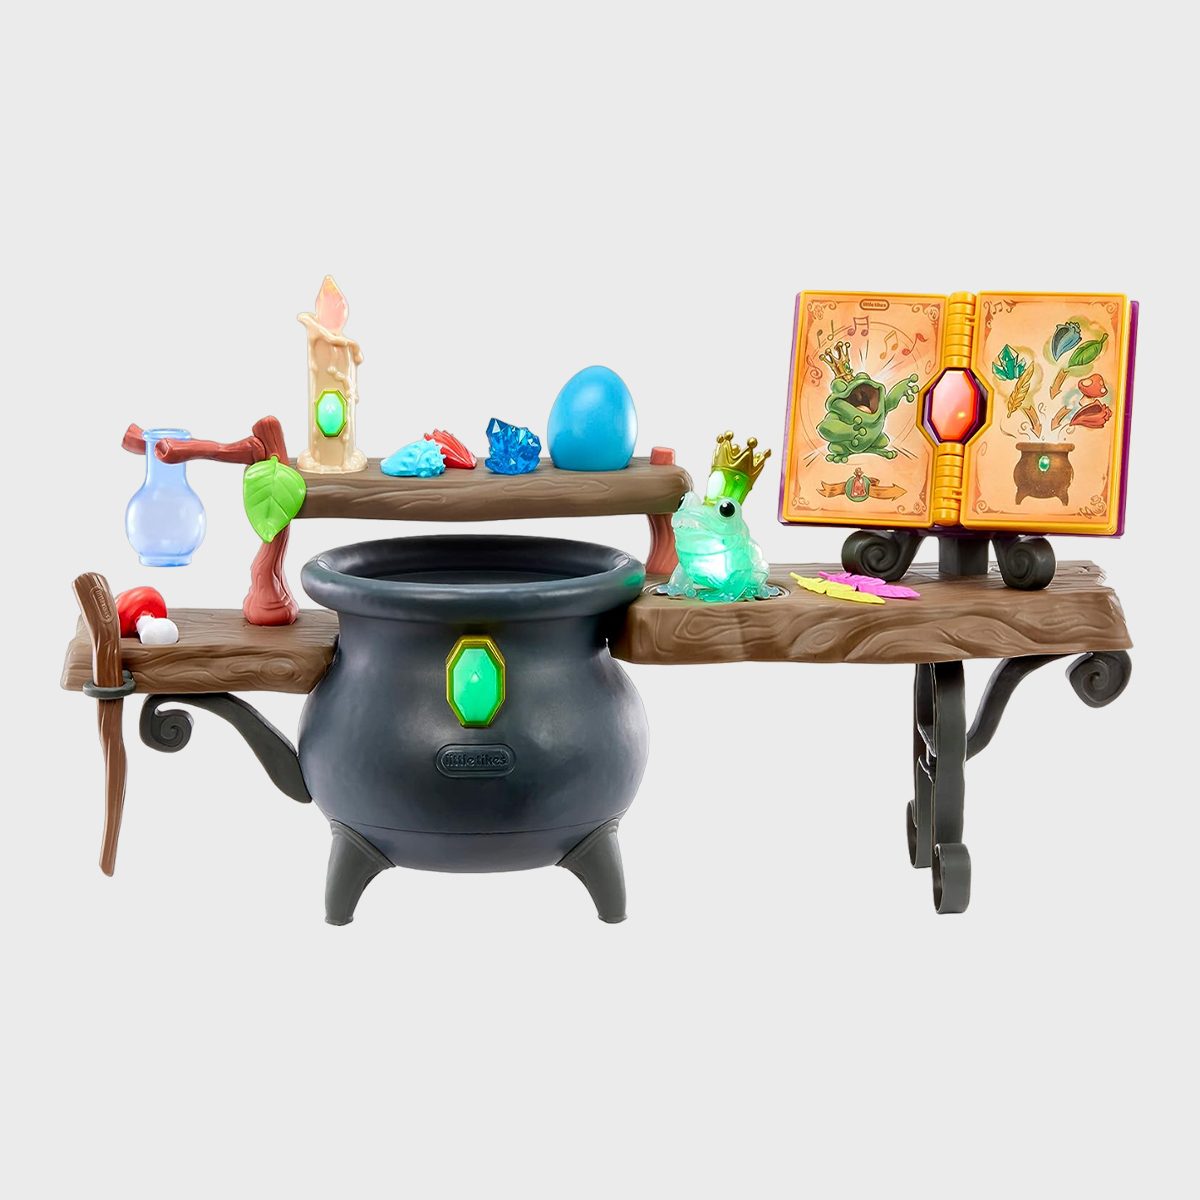 <p>Your little wizard will be delighted to have her very own <a href="https://www.amazon.com/Little-Tikes-Workshop-Roleplay-Tabletop/dp/B0B6LXJNVY" rel="noopener noreferrer">magical workshop</a> where she can mix potions, cast spells and try to turn a frog into a prince. There are over 50 fun lights and sounds, an interactive frog, and an easy-to-follow spell book so she can let her imagination run wild. This <a href="https://www.rd.com/list/hottest-christmas-toys-to-buy-before-they-sell-out/" rel="noopener noreferrer">popular toy</a> has been known to sell out, so you'll want to click "shop now" to prevent missing out.</p> <p class="listicle-page__cta-button-shop"><a class="shop-btn" href="https://www.amazon.com/Little-Tikes-Workshop-Roleplay-Tabletop/dp/B0B6LXJNVY/">Shop Now</a></p>